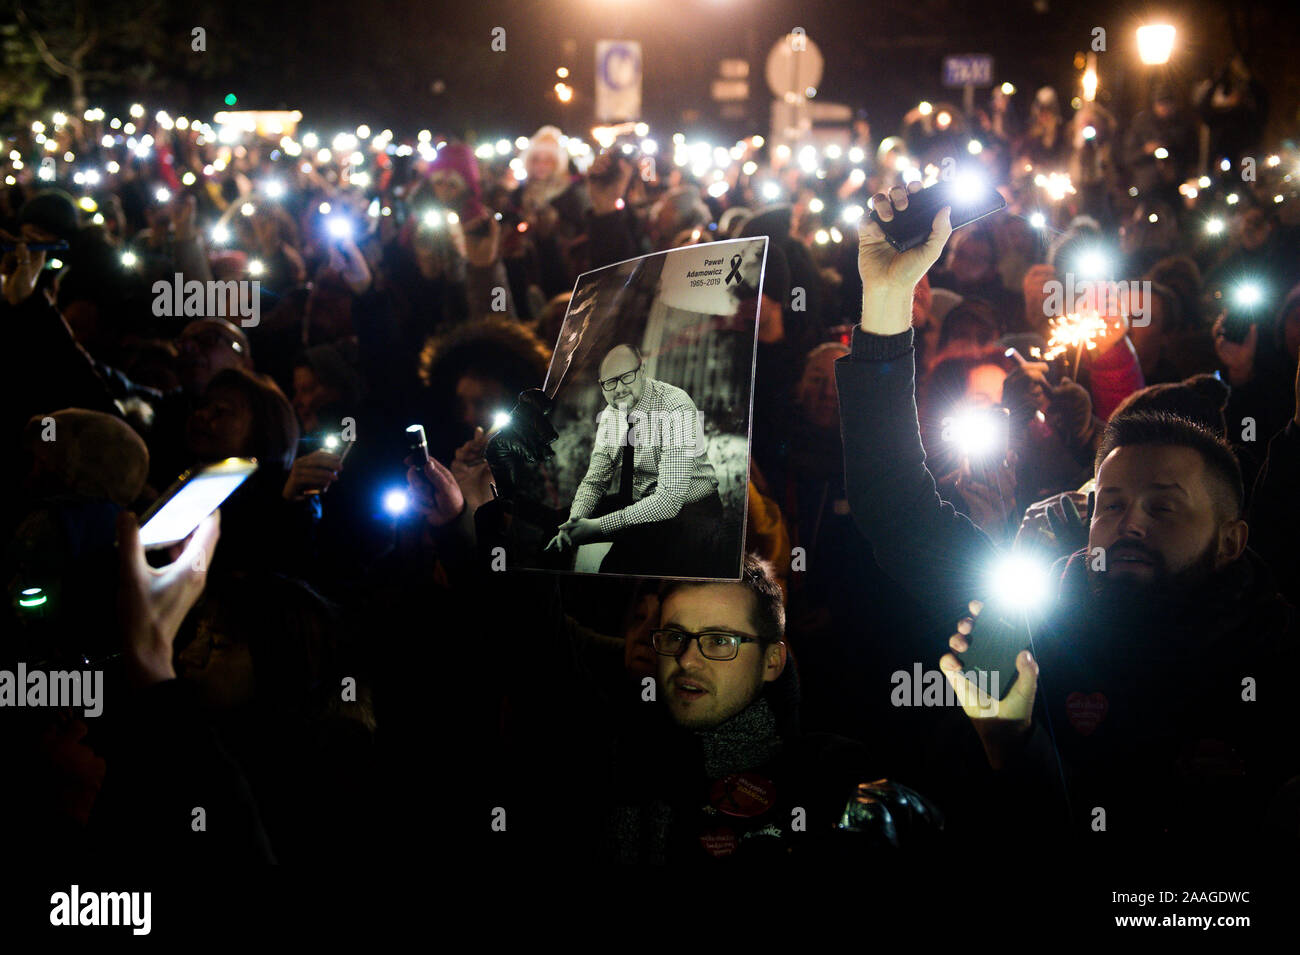 Protesters use phones to shine light during the demonstration called Light to heaven for Pawel Adamowicz at the Coal Market in Gdansk.  Mayor of Gdansk, Pawel Adamowicz was stabbed on stage while attending a charity event in Gdansk on 13 January and died a day later of his injuries. Stock Photo